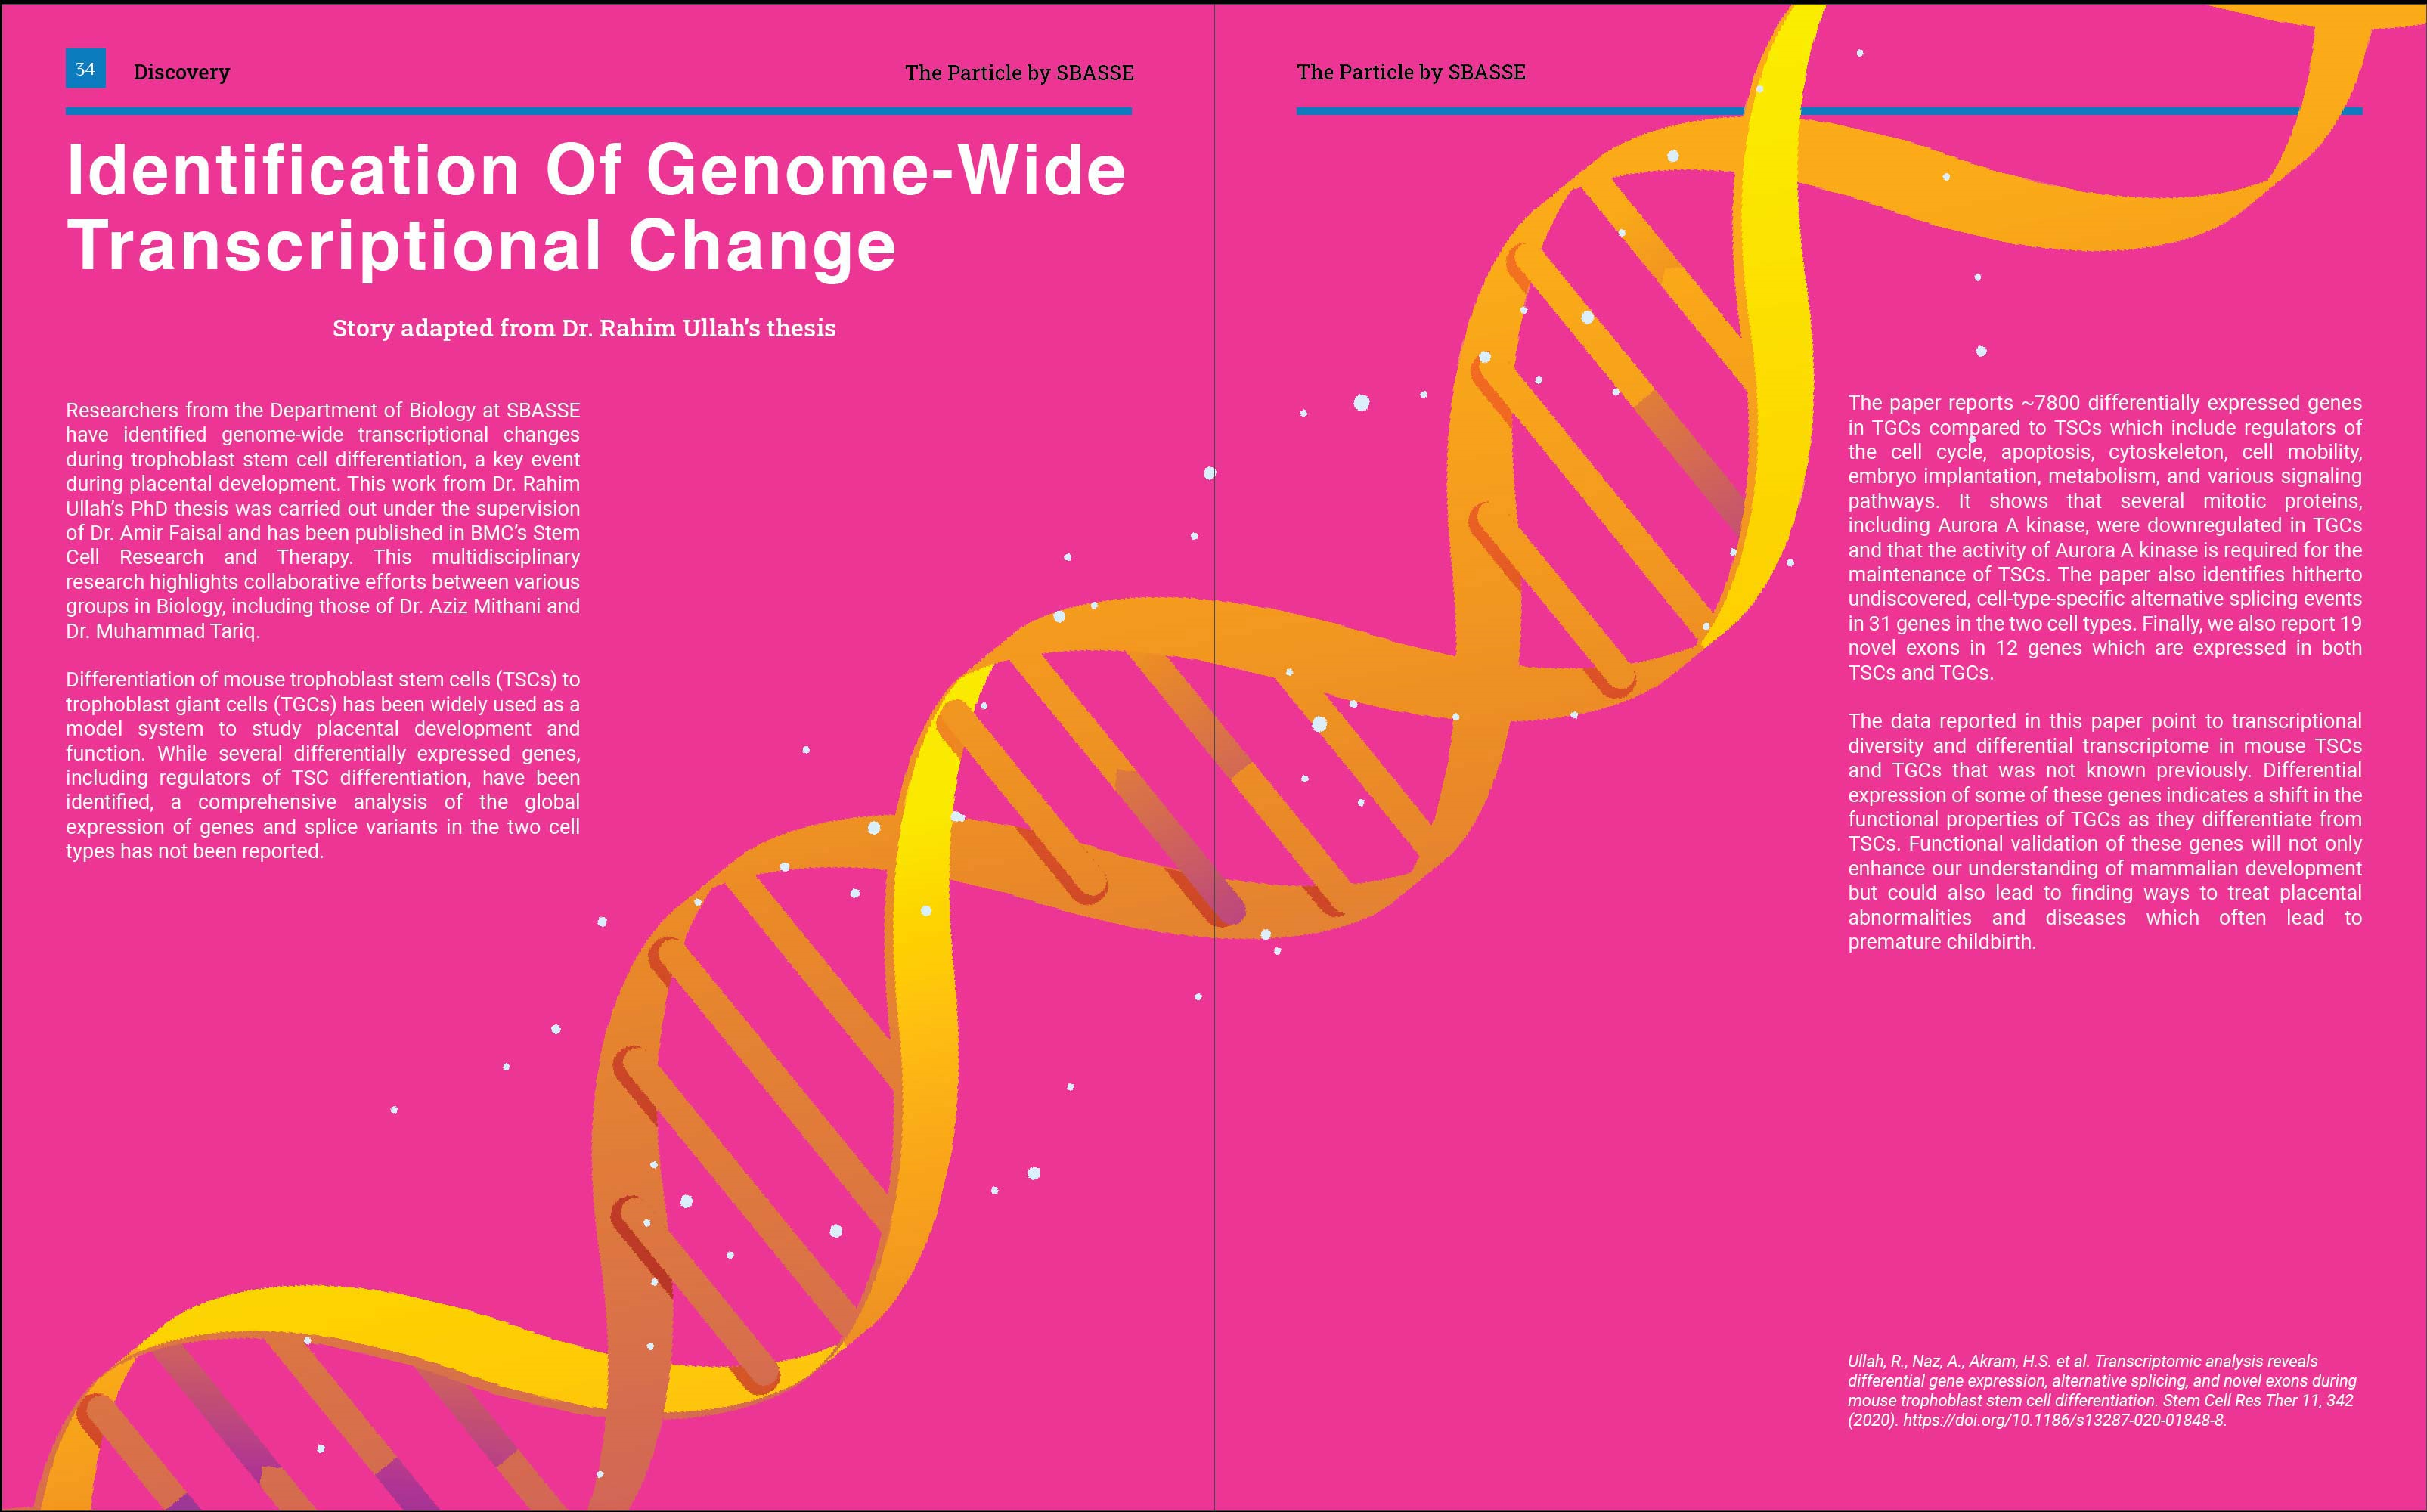 Article on Genome-wide Transcriptional Change